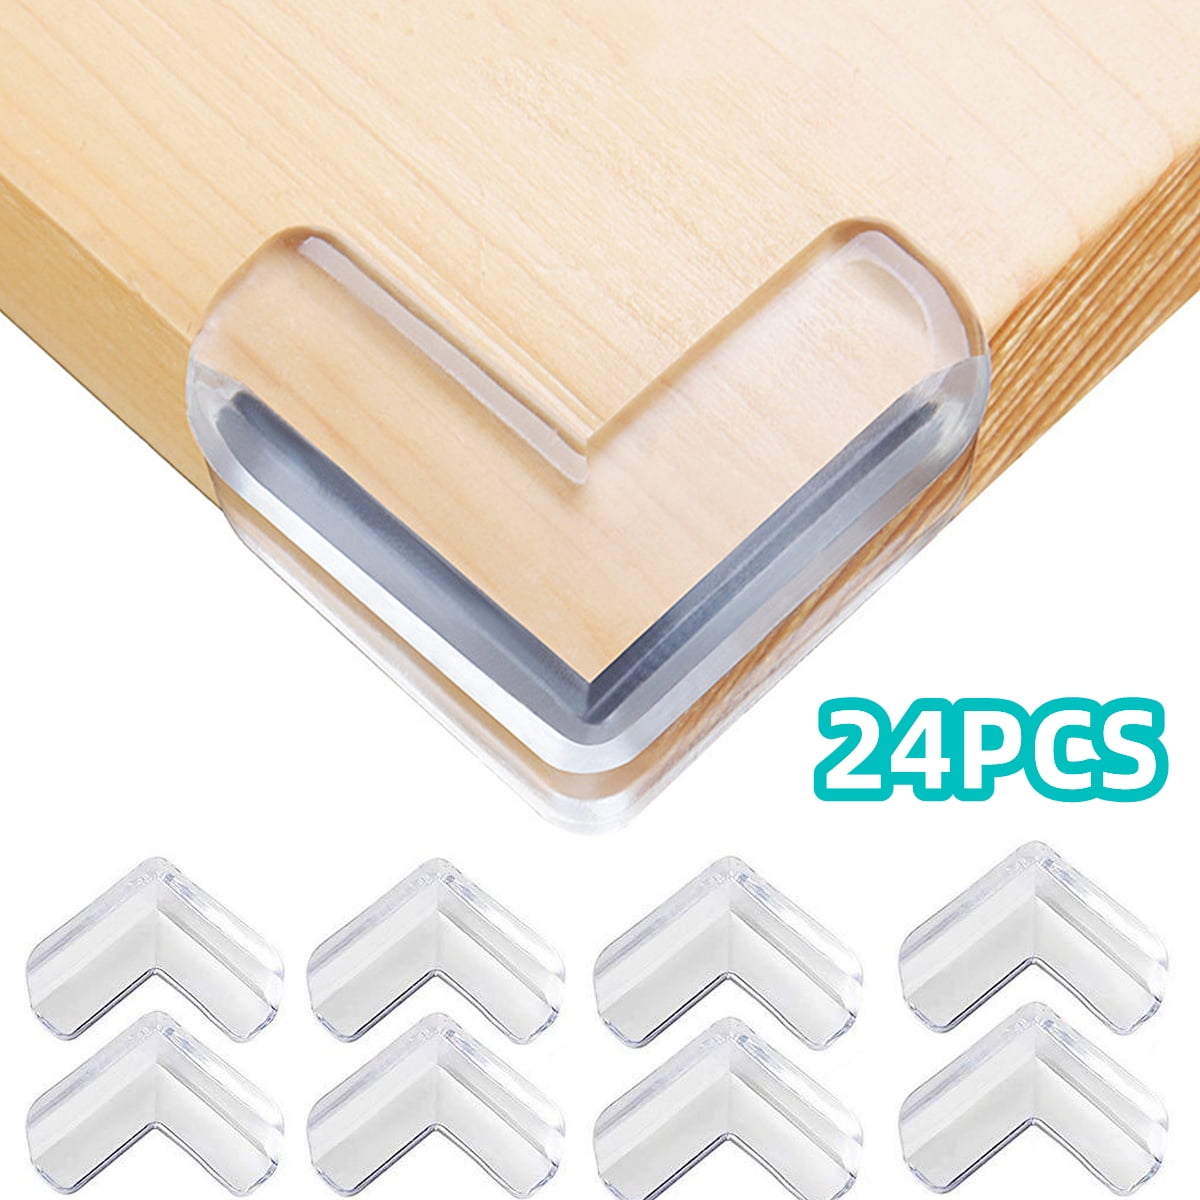 AIXMEET 8 Pack Corner Protector for Baby, Clear Furniture Corner Guard & Edge Safety Bumpers for Table Edges & Sharp Corners - Baby Proofing (L Shape)